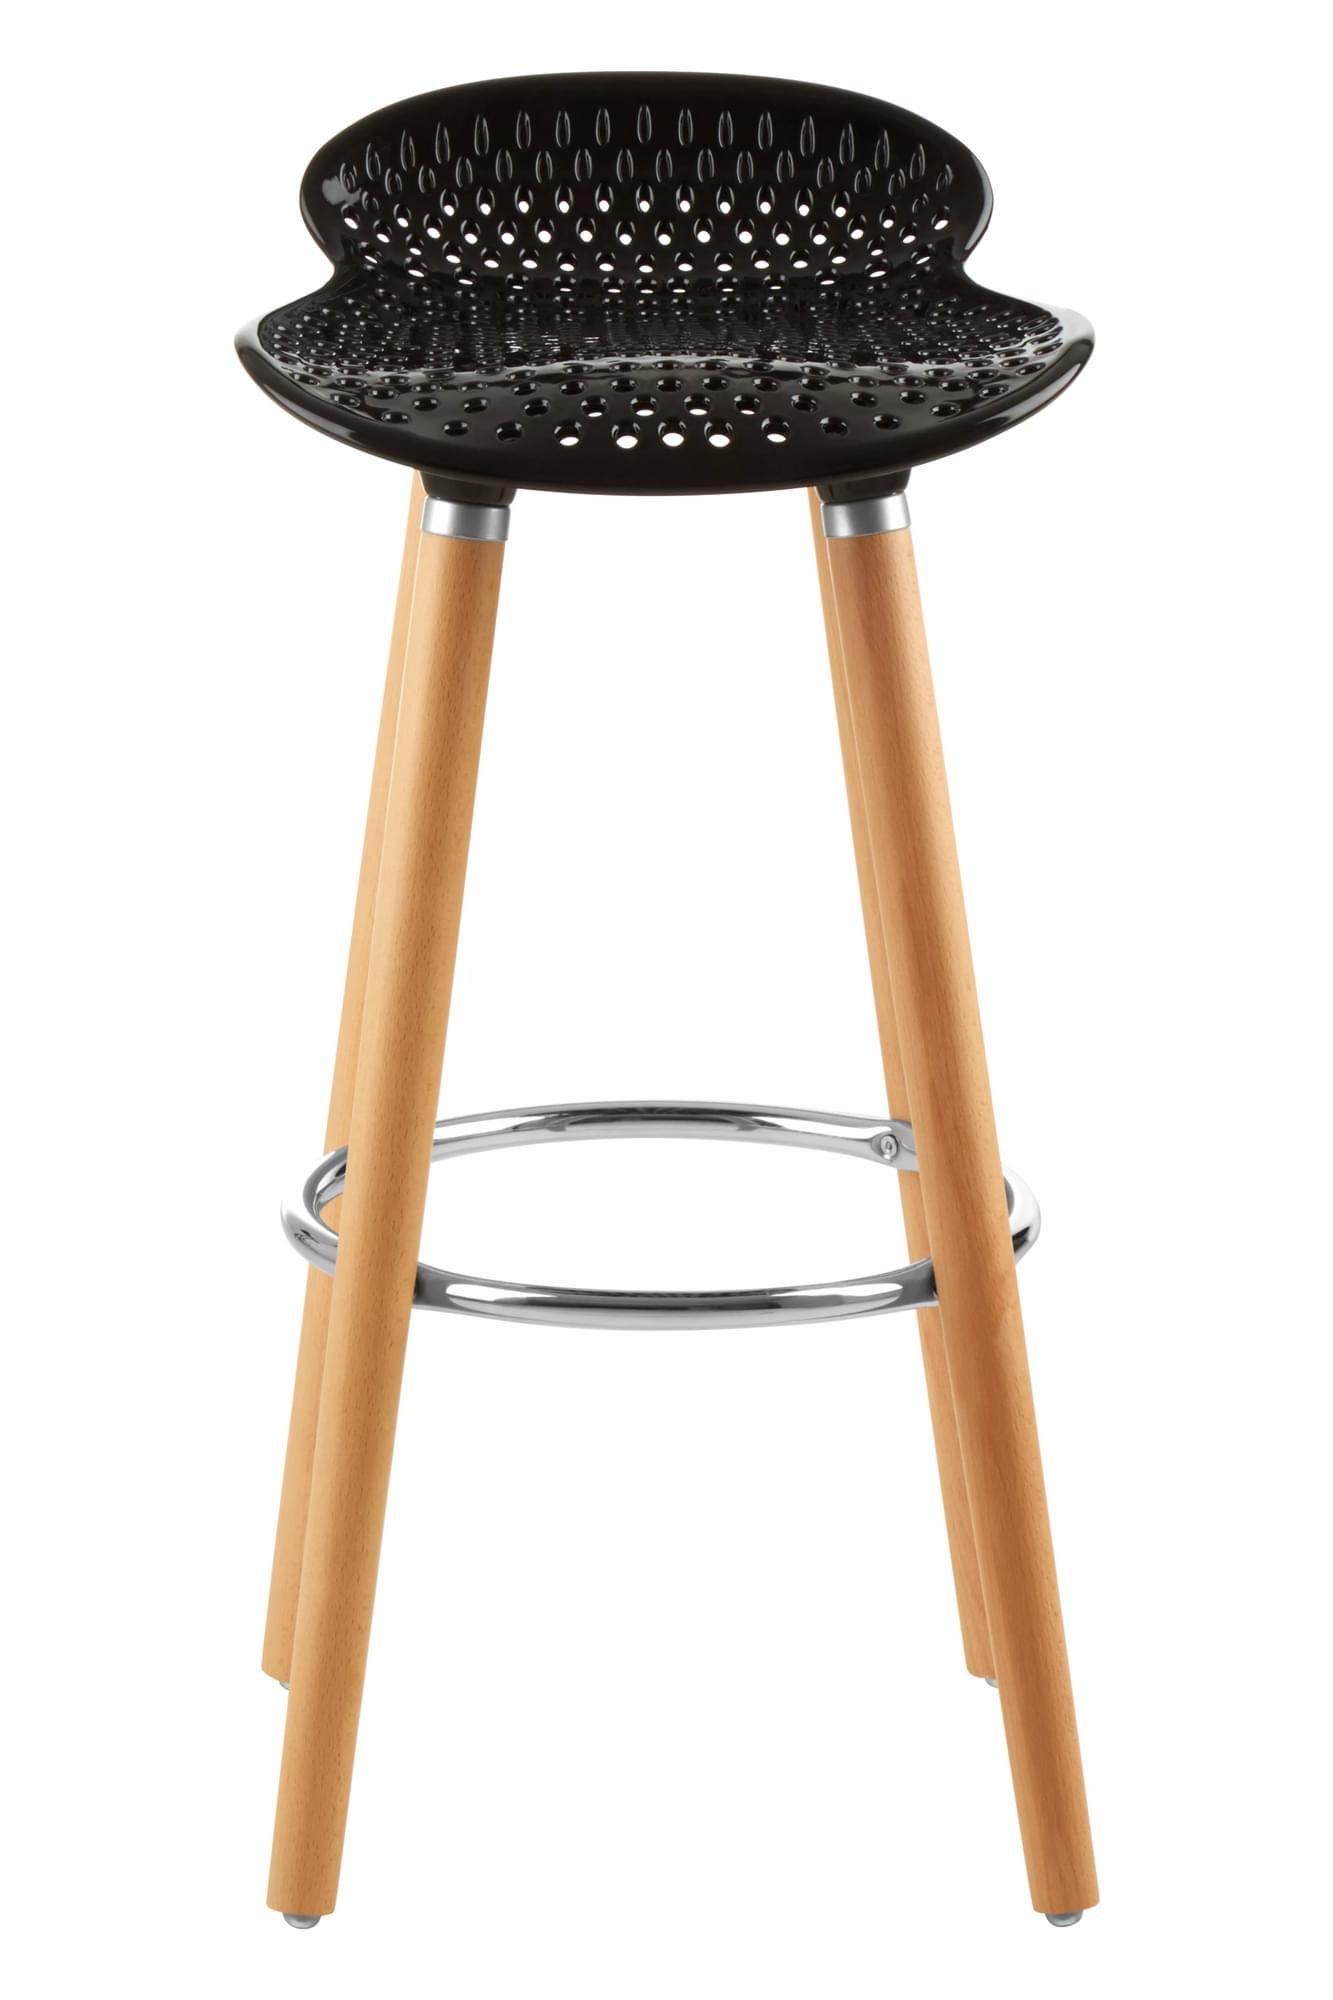 Interiors by Premier Matte Black Bar Stool, Easy to Clean Kitchen Bar Stool, Footrest Bar Stool, Spa